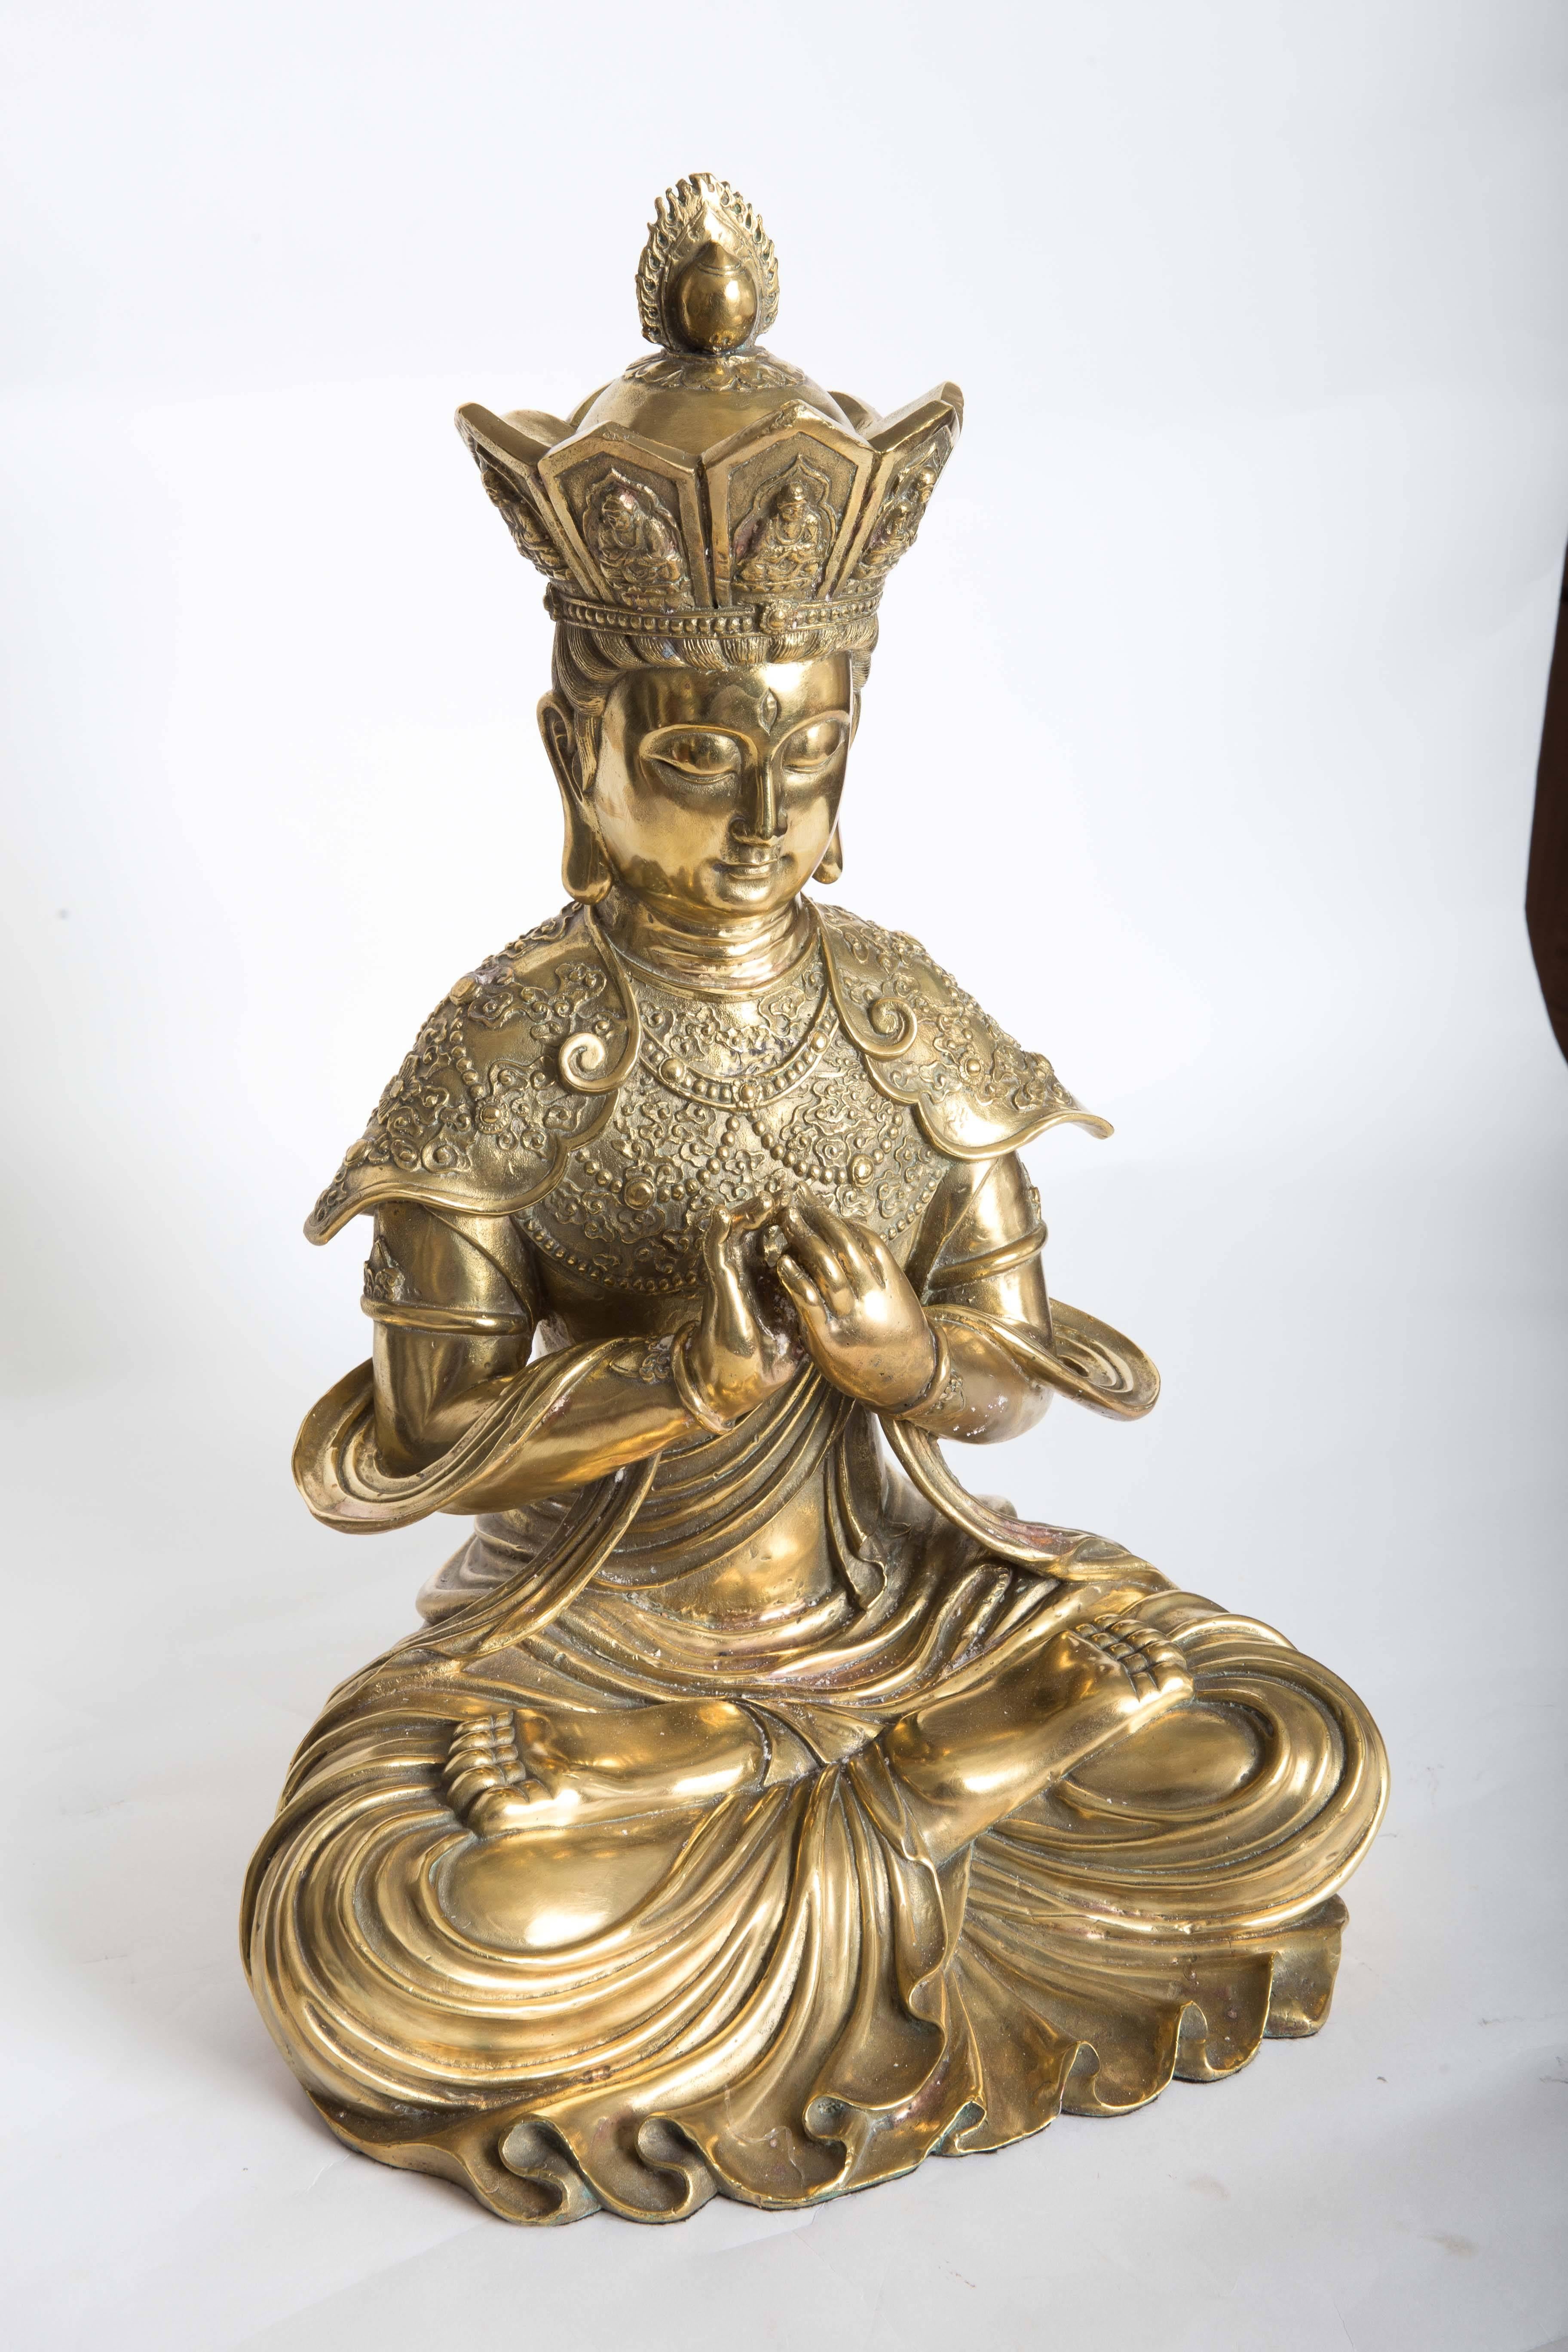 Chinese Export Intricately Etched Bronze Sculpture of a Seated Diety Figure